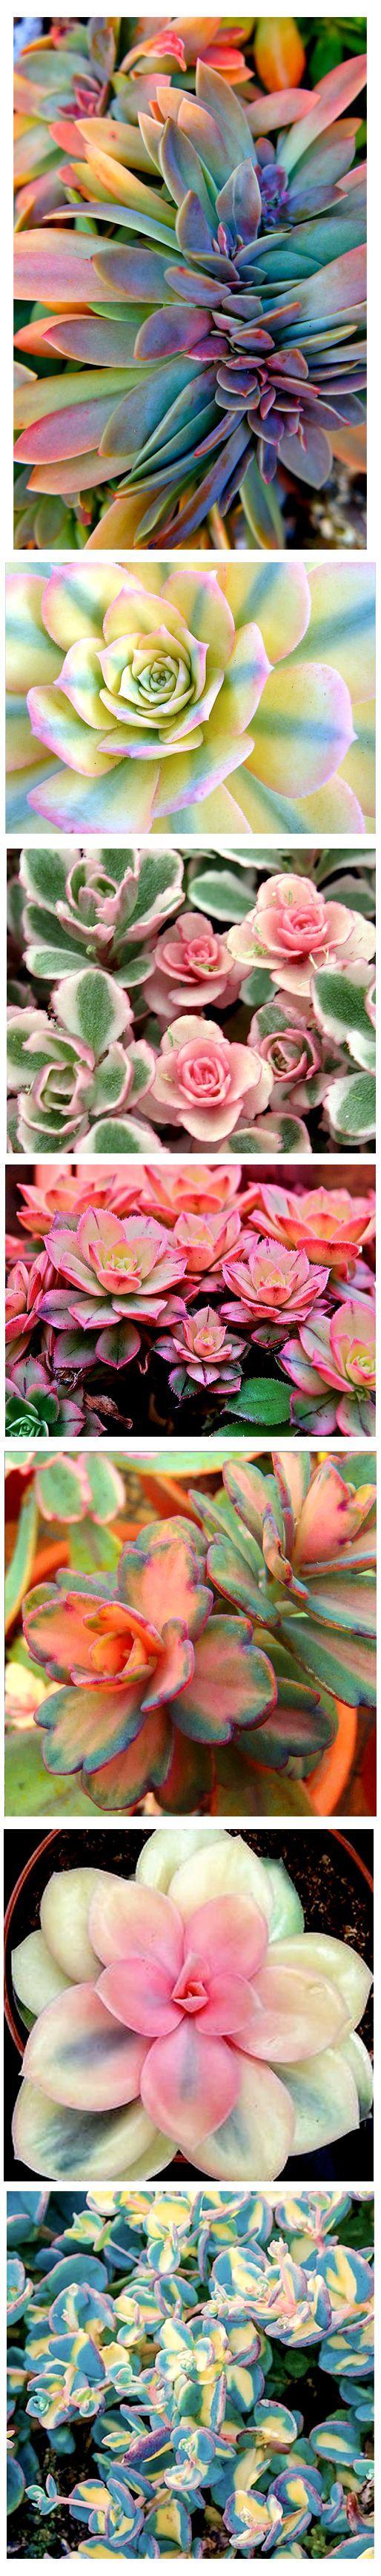 Wedding - Variegated Succulents . Are These Real??? Would Love To Have Some Of These